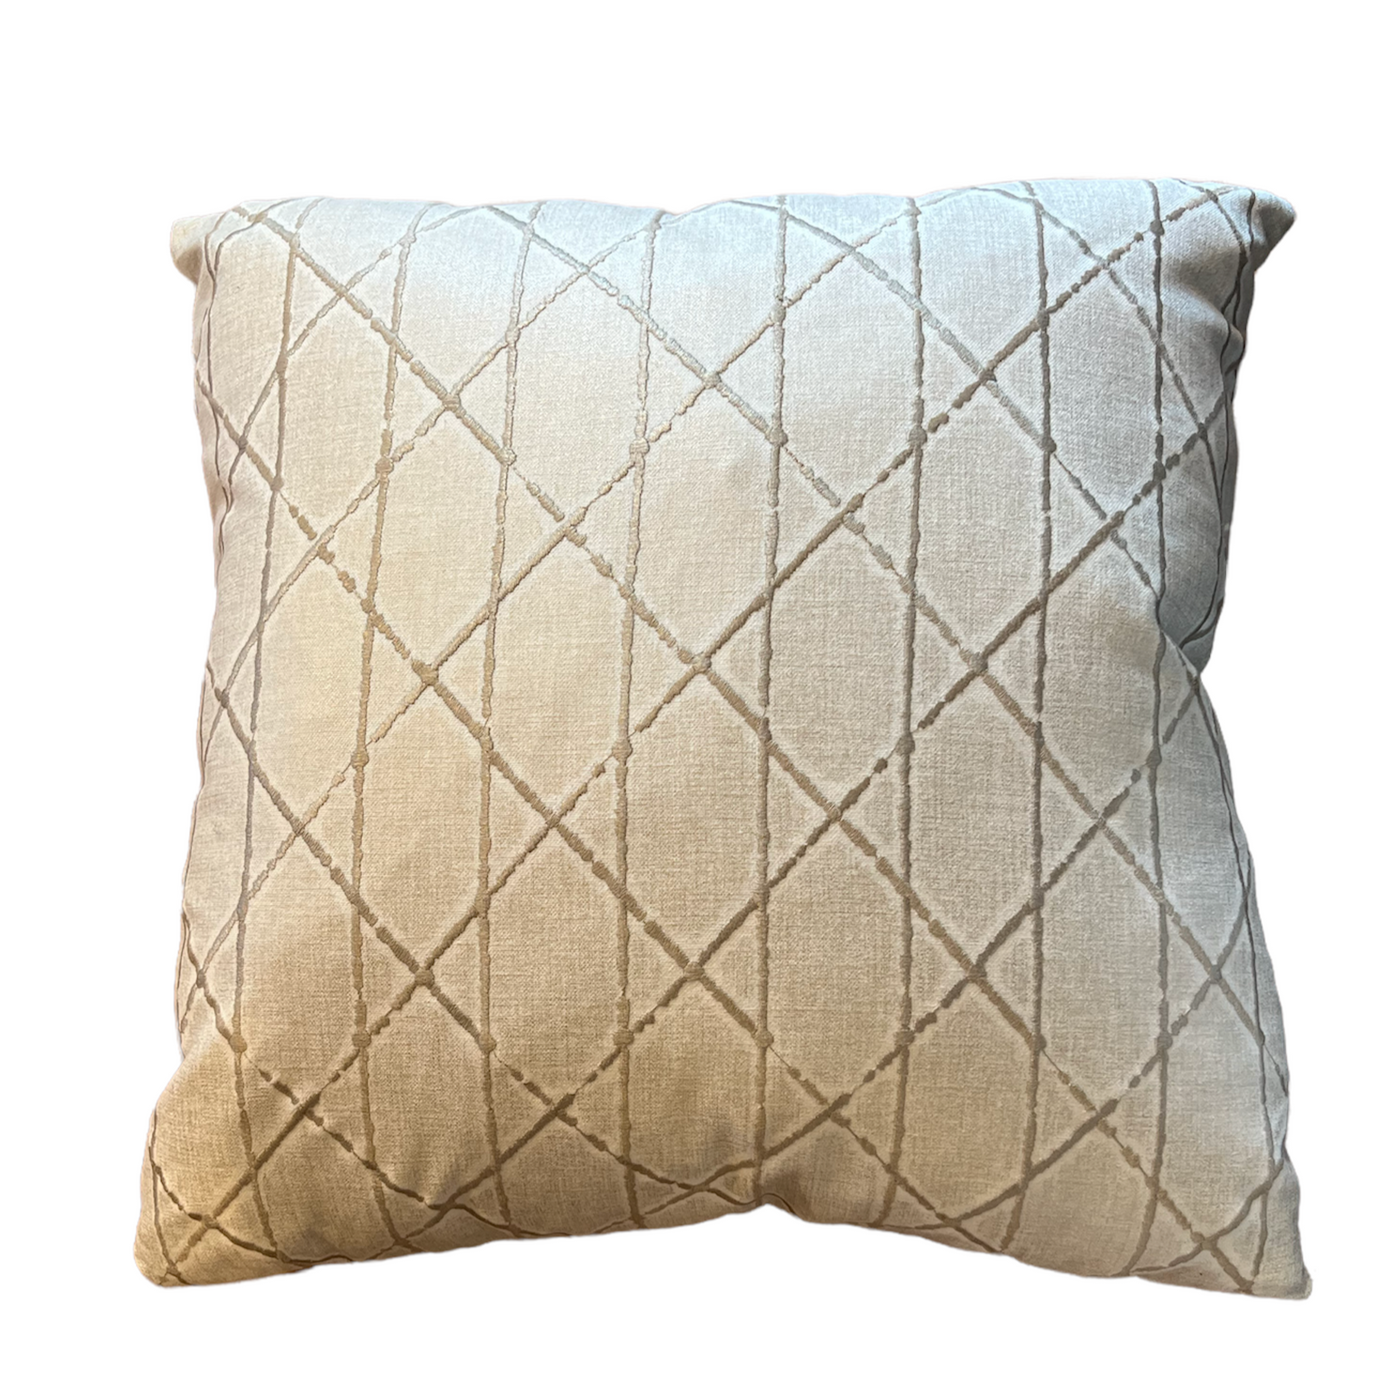 Pillow, Frosted Gilt - Danshire Market and Design 